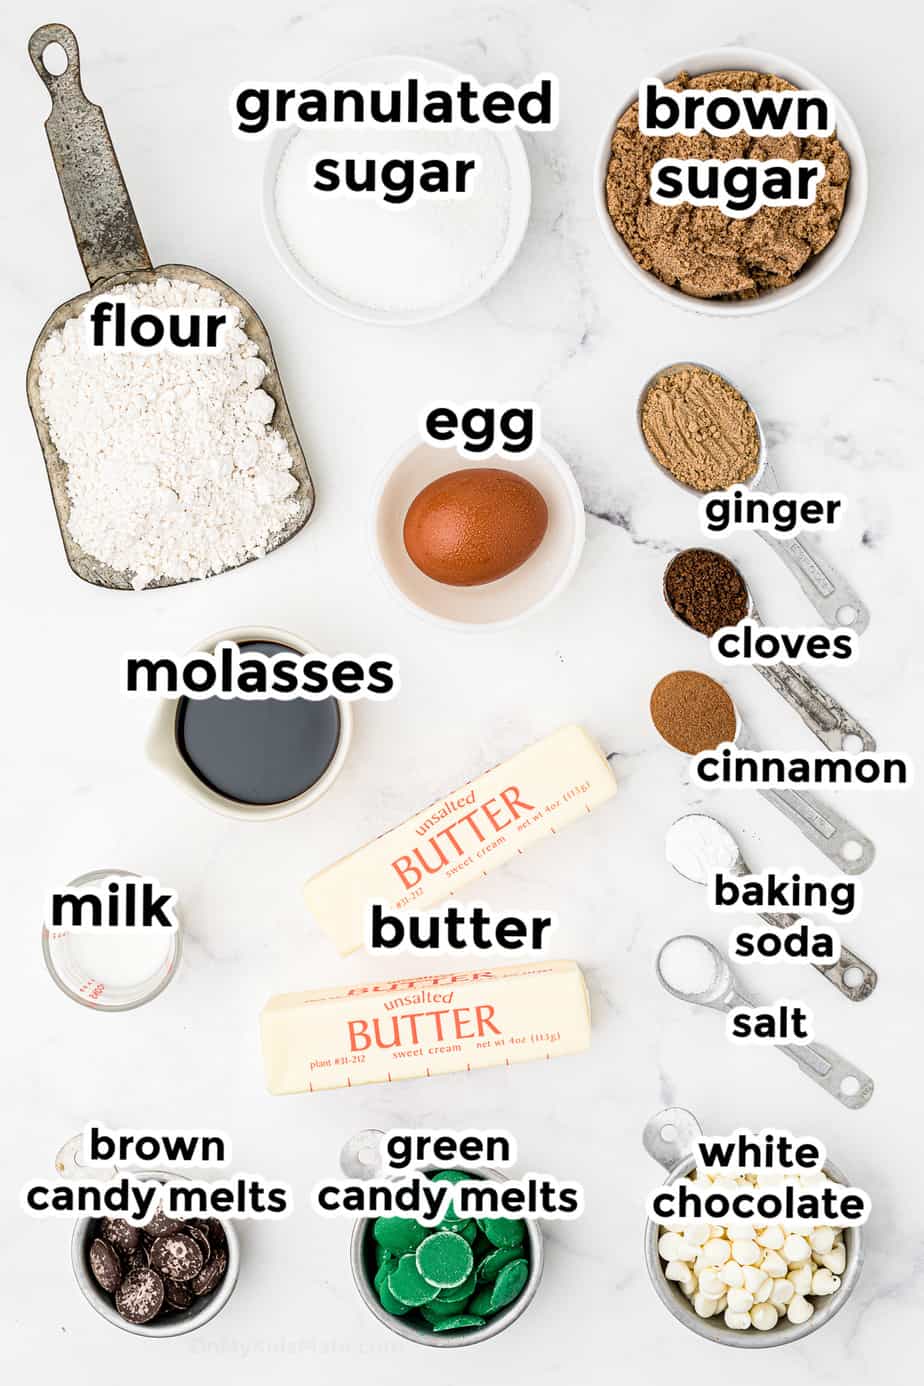 Ingredients for molasses ginger cookies in bowls overhead labeled